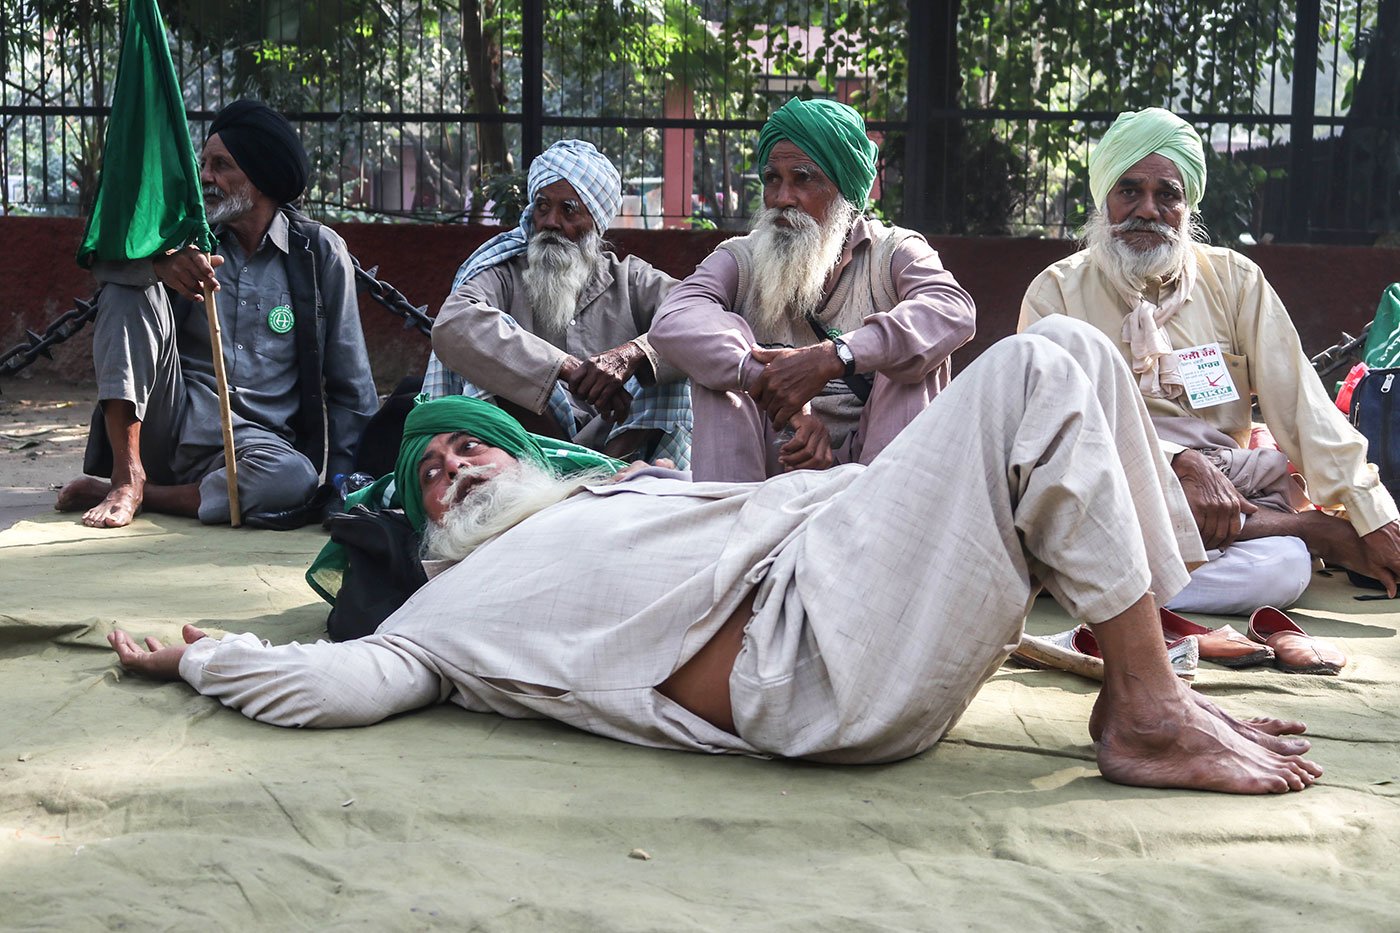 Farmers from rural Punjab resting at the Parliament Street